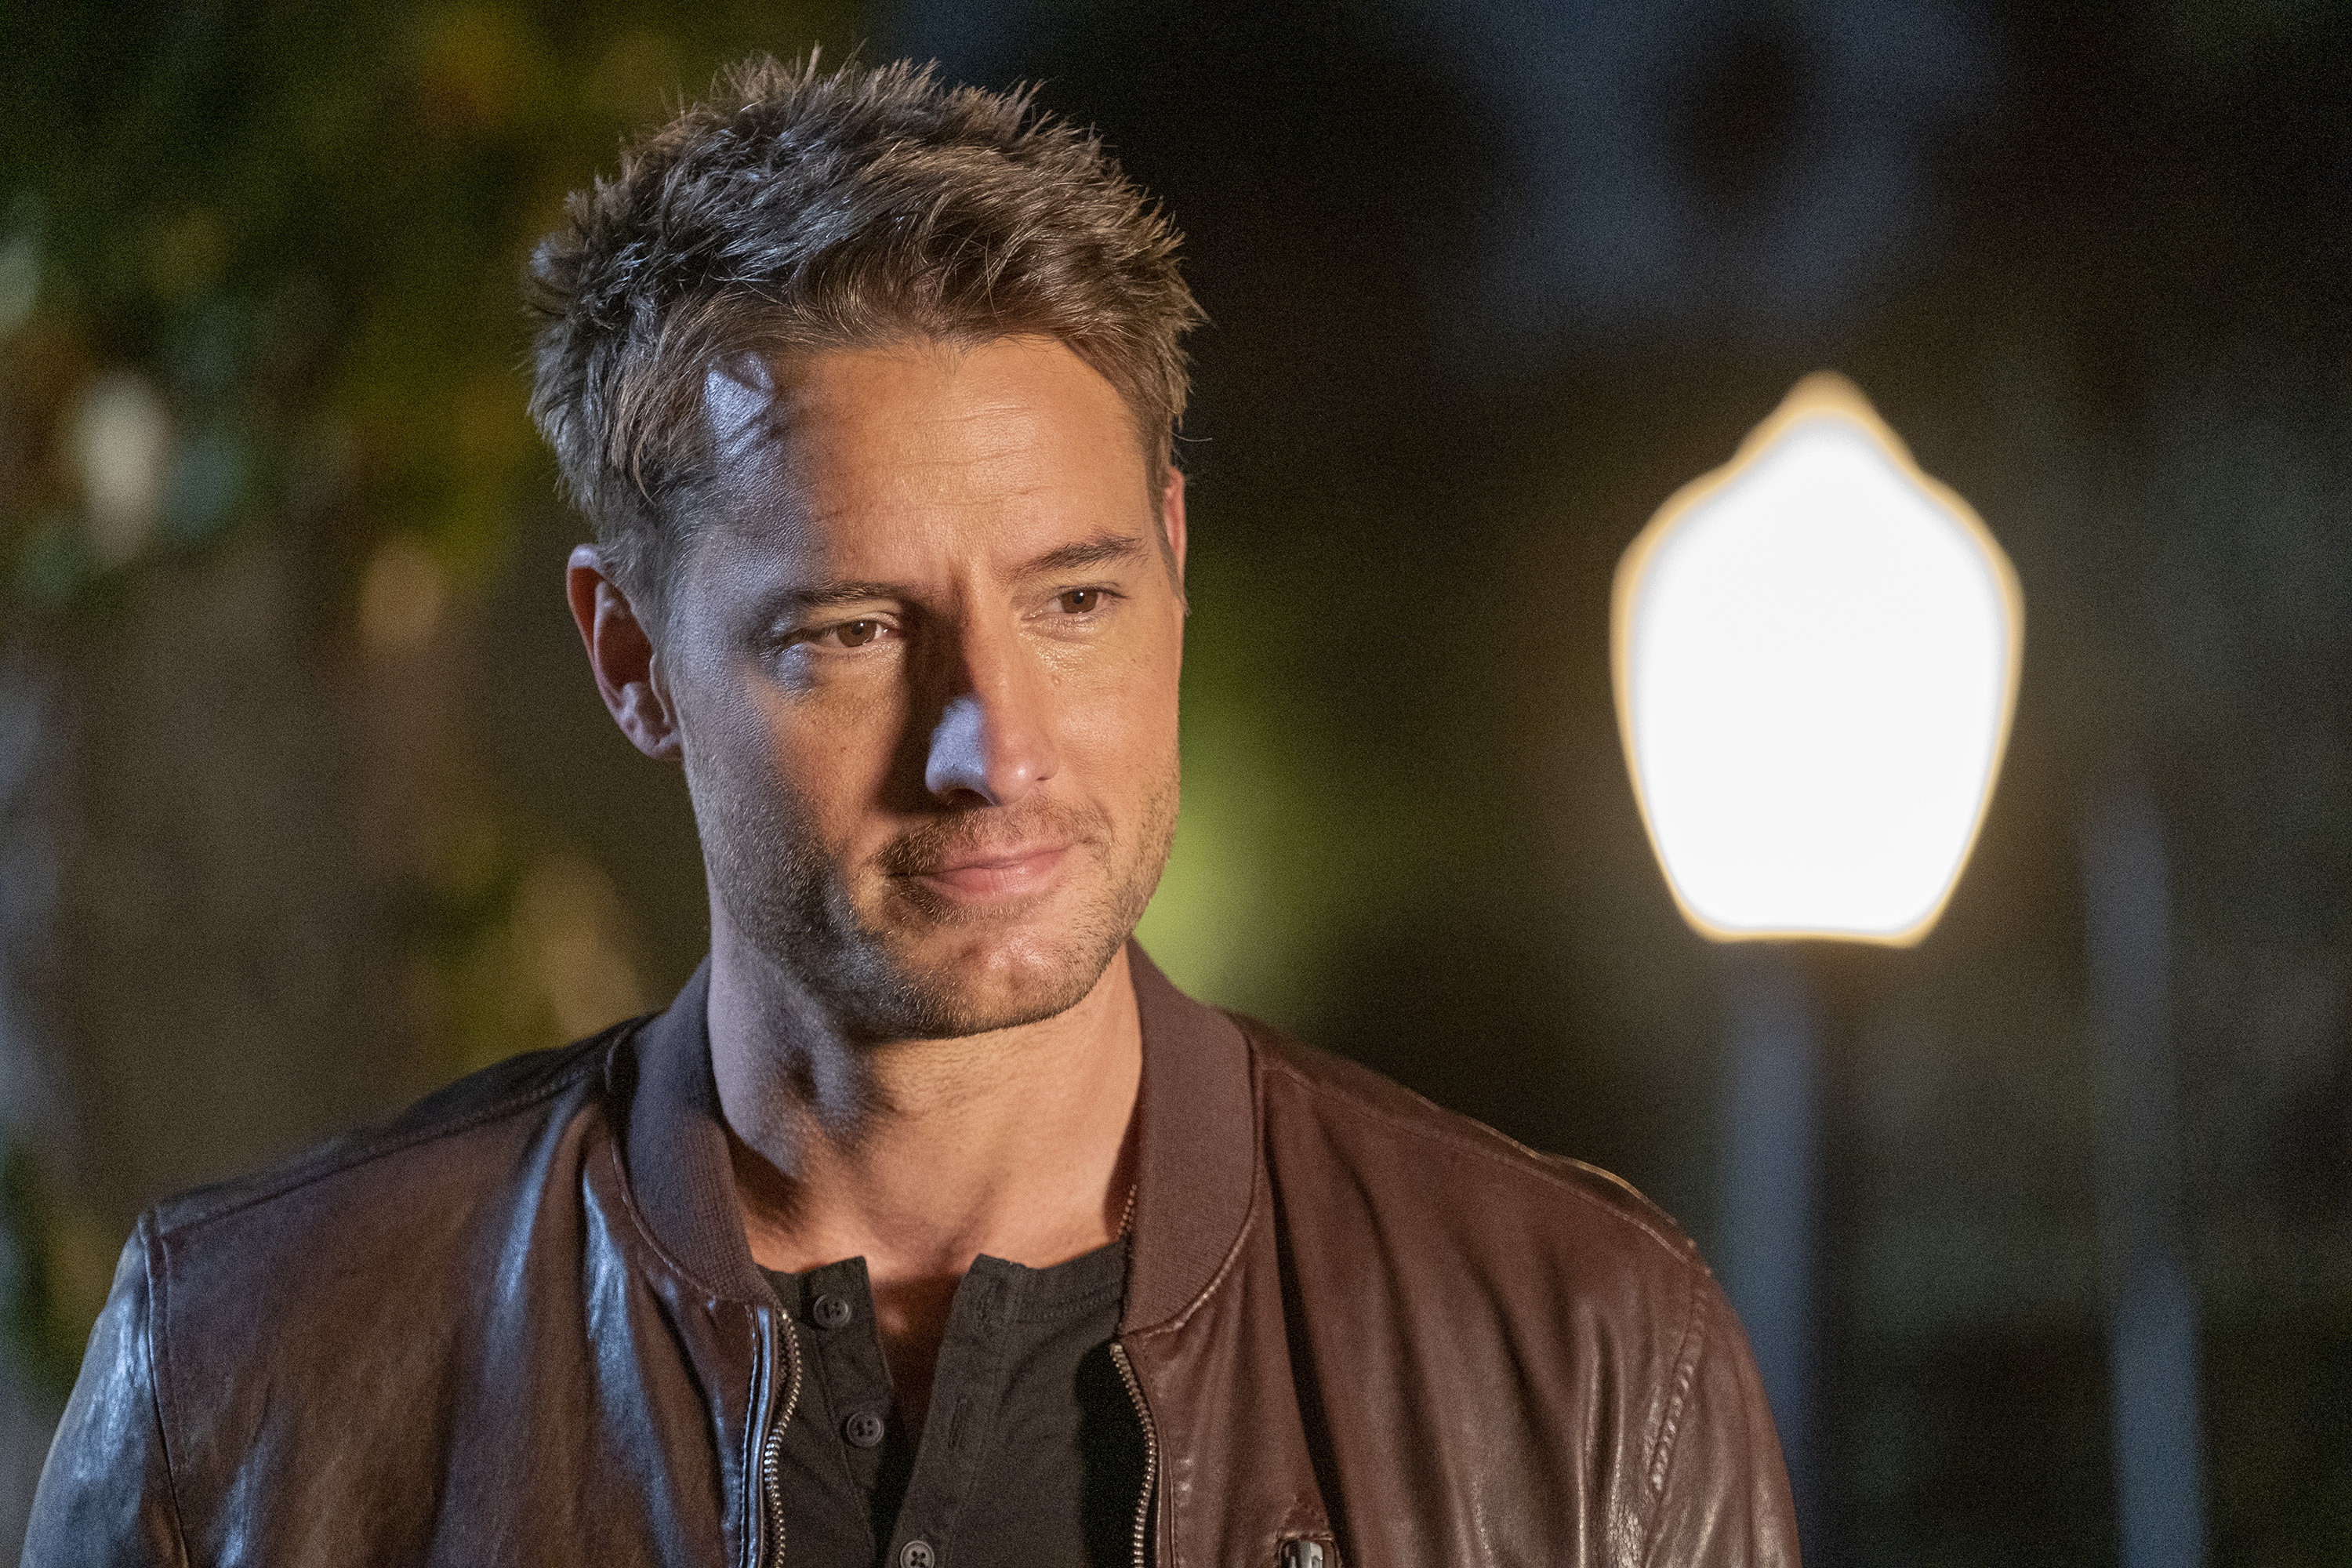 'This Is Us' star Justin Hartley, in character as Kevin Pearson, wears a brown leather jacket over a black shirt.